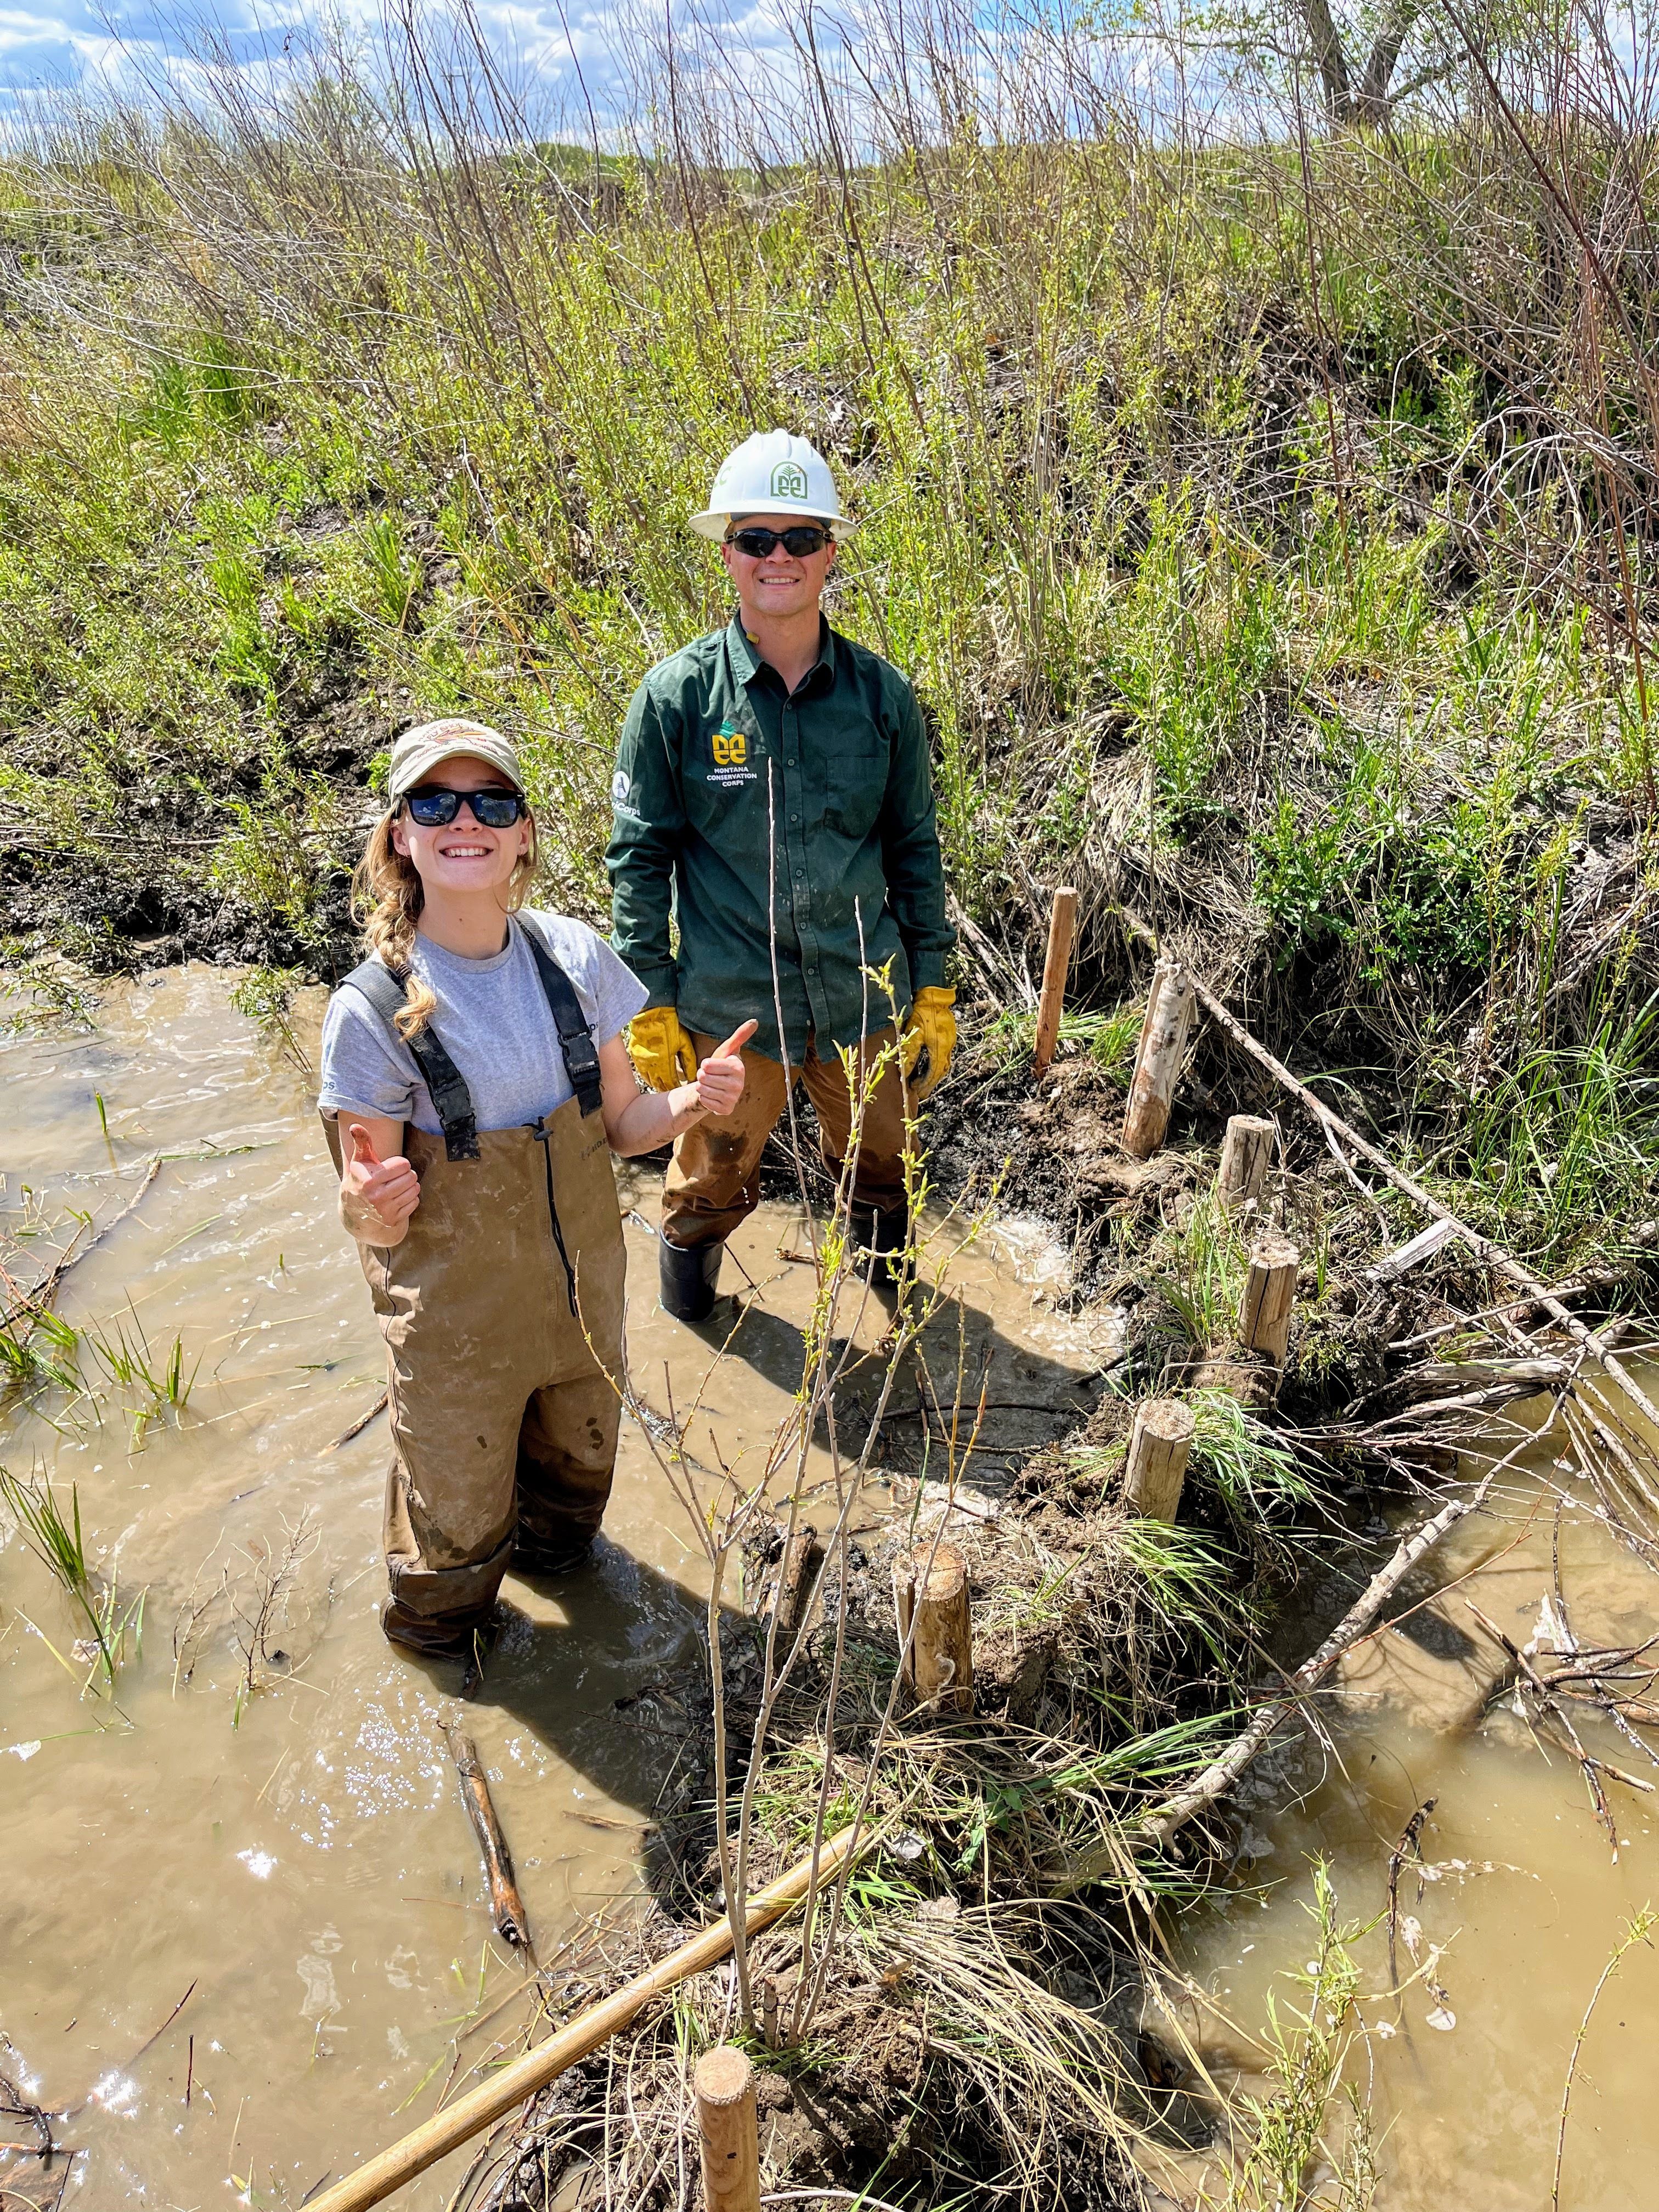 Two people stand in a muddy stream next to a beaver dam analog they have built. The beaver dam analog consists of several posts mounted upright in the water, with reeds and sticks woven between the posts.